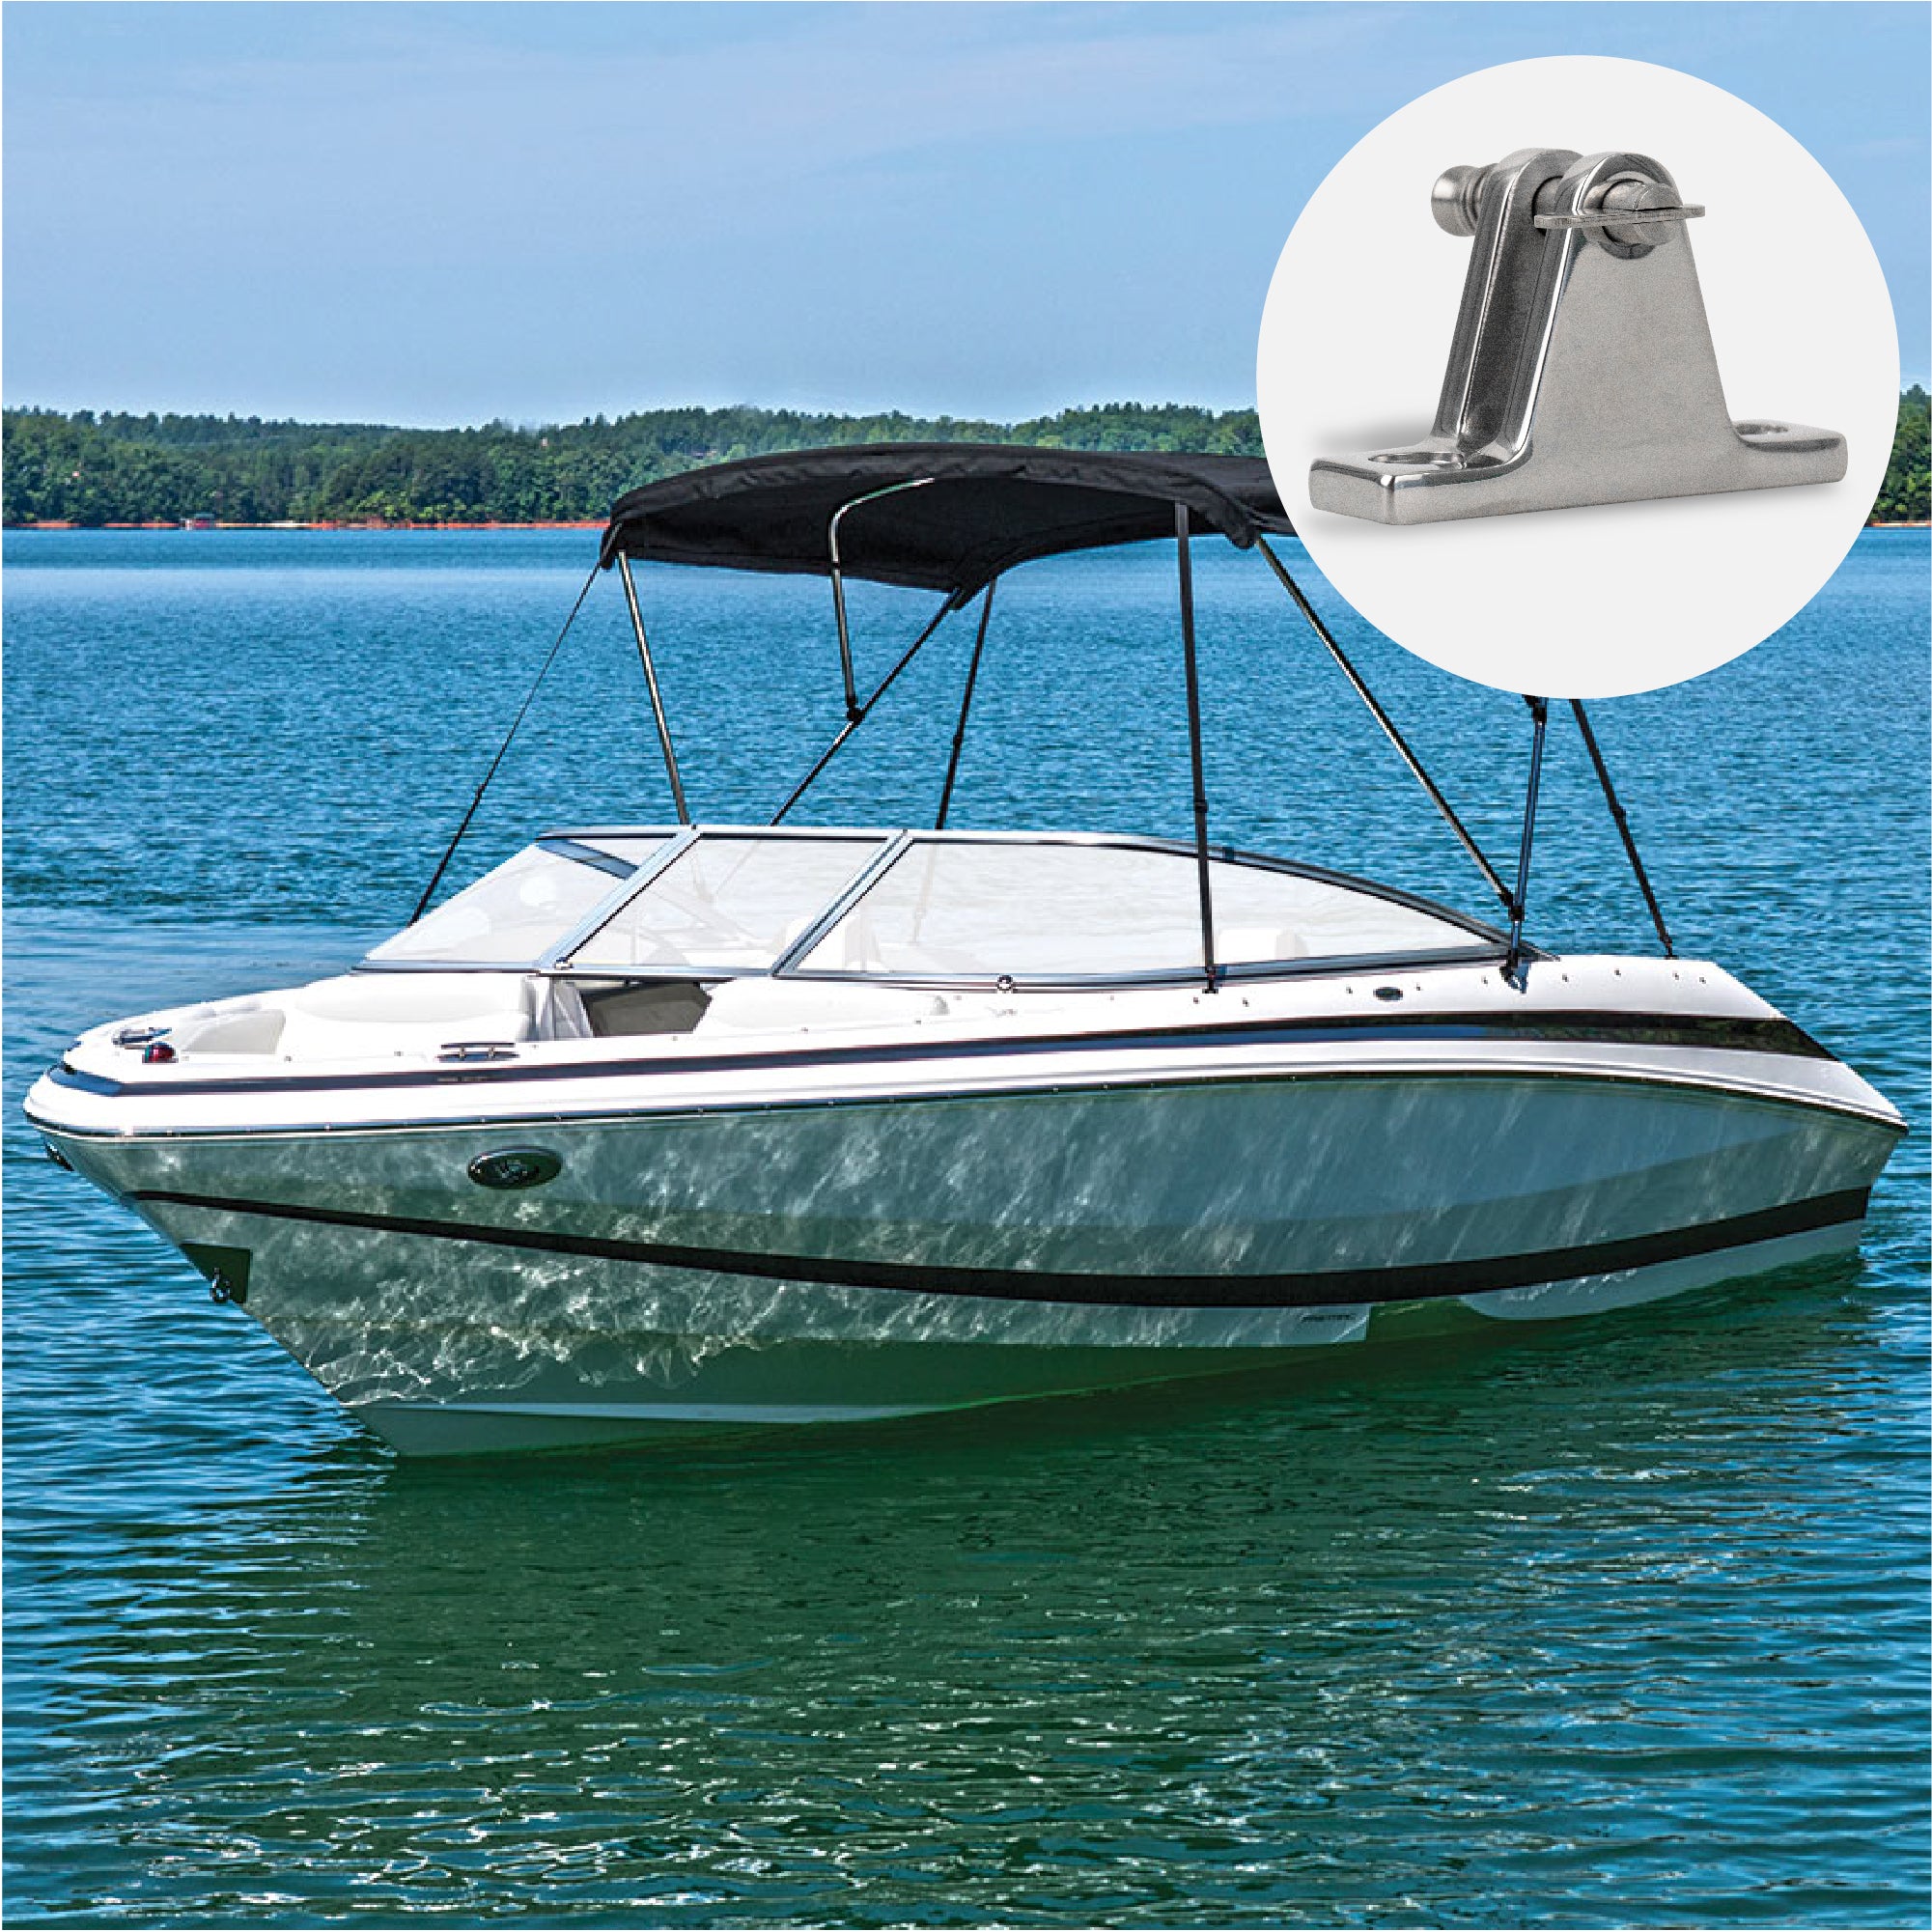 Bimini Top Deck Hinge with Removable Pin, Stainless Steel - FO1671